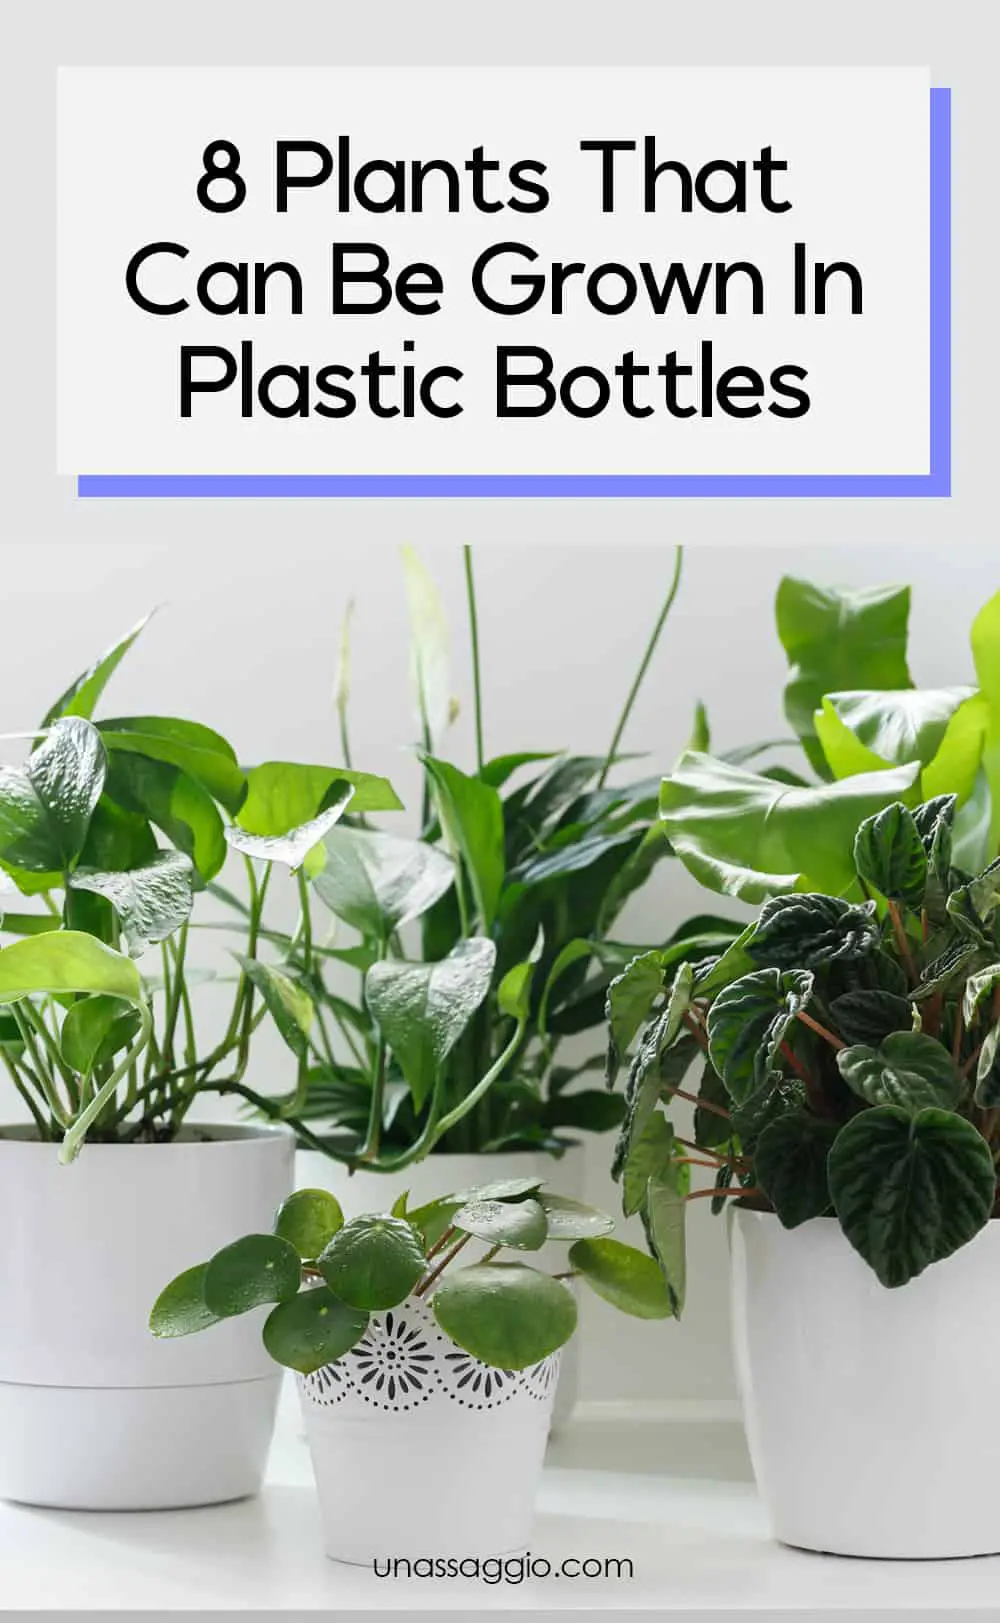 8 Plants That Can Be Grown In Plastic Bottles